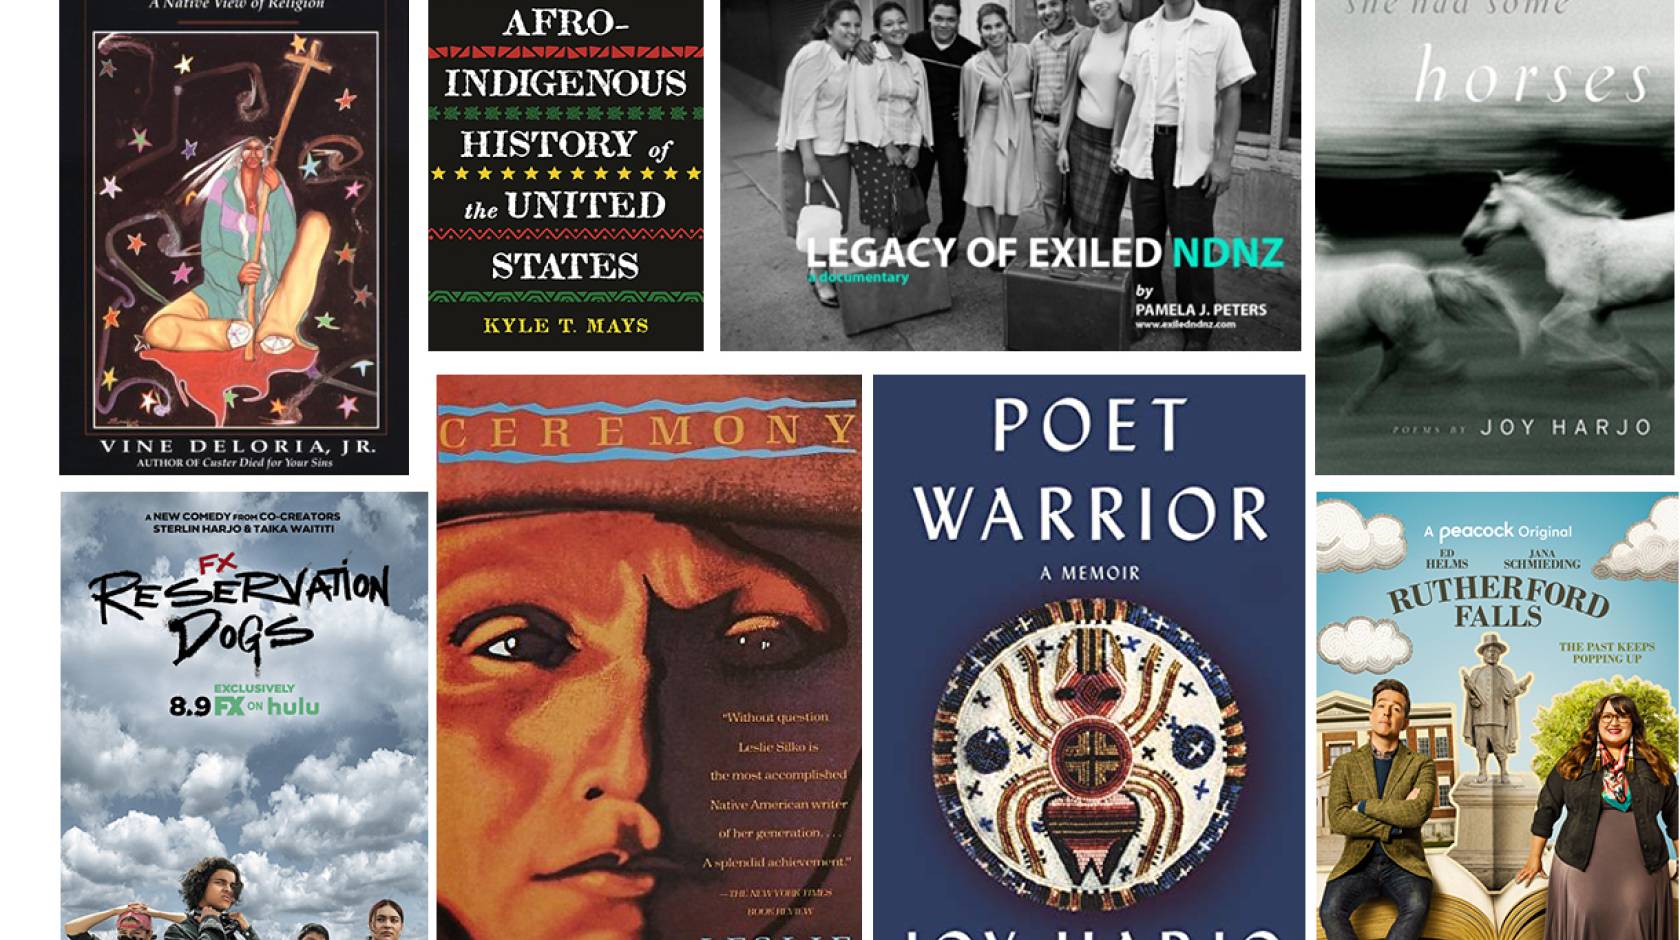 Collage of books, movies, CDs that feature Native American artists